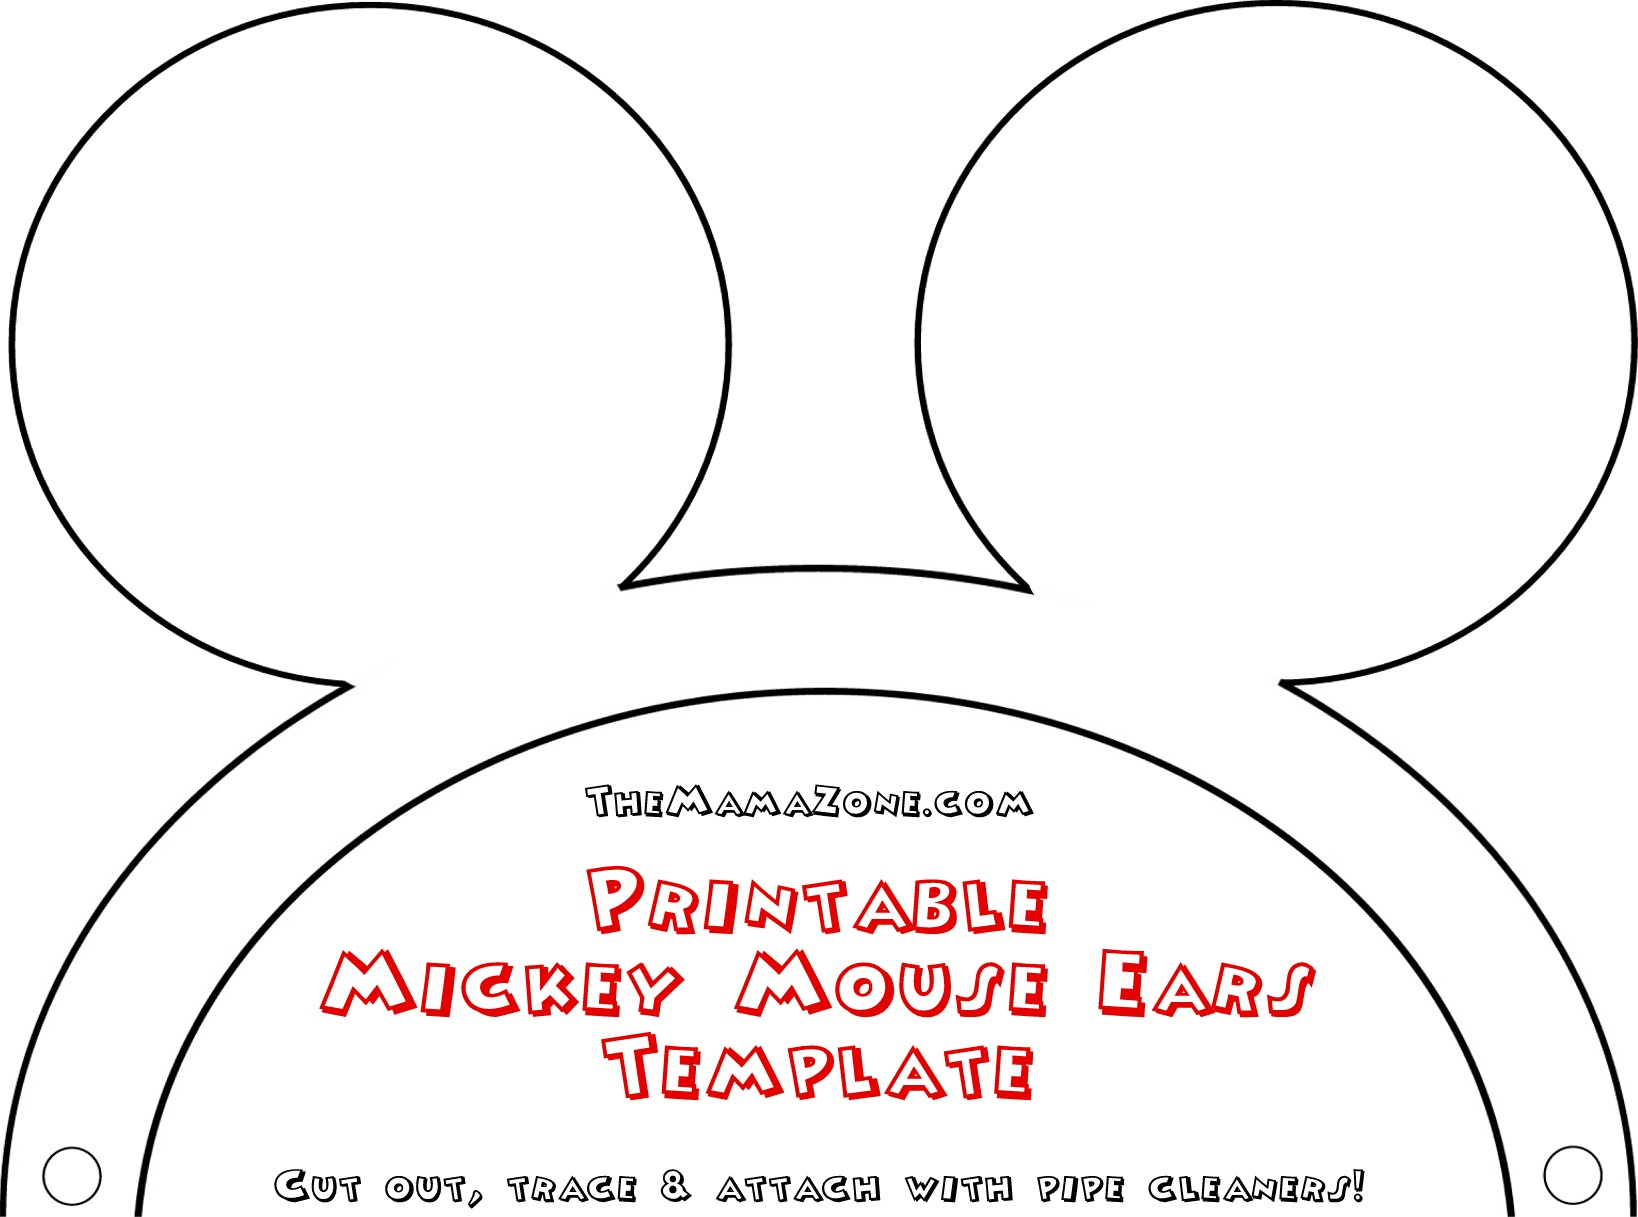 Free Mickey Mouse Ears Template | The Mama Zone - Free Printable Mickey Mouse Template